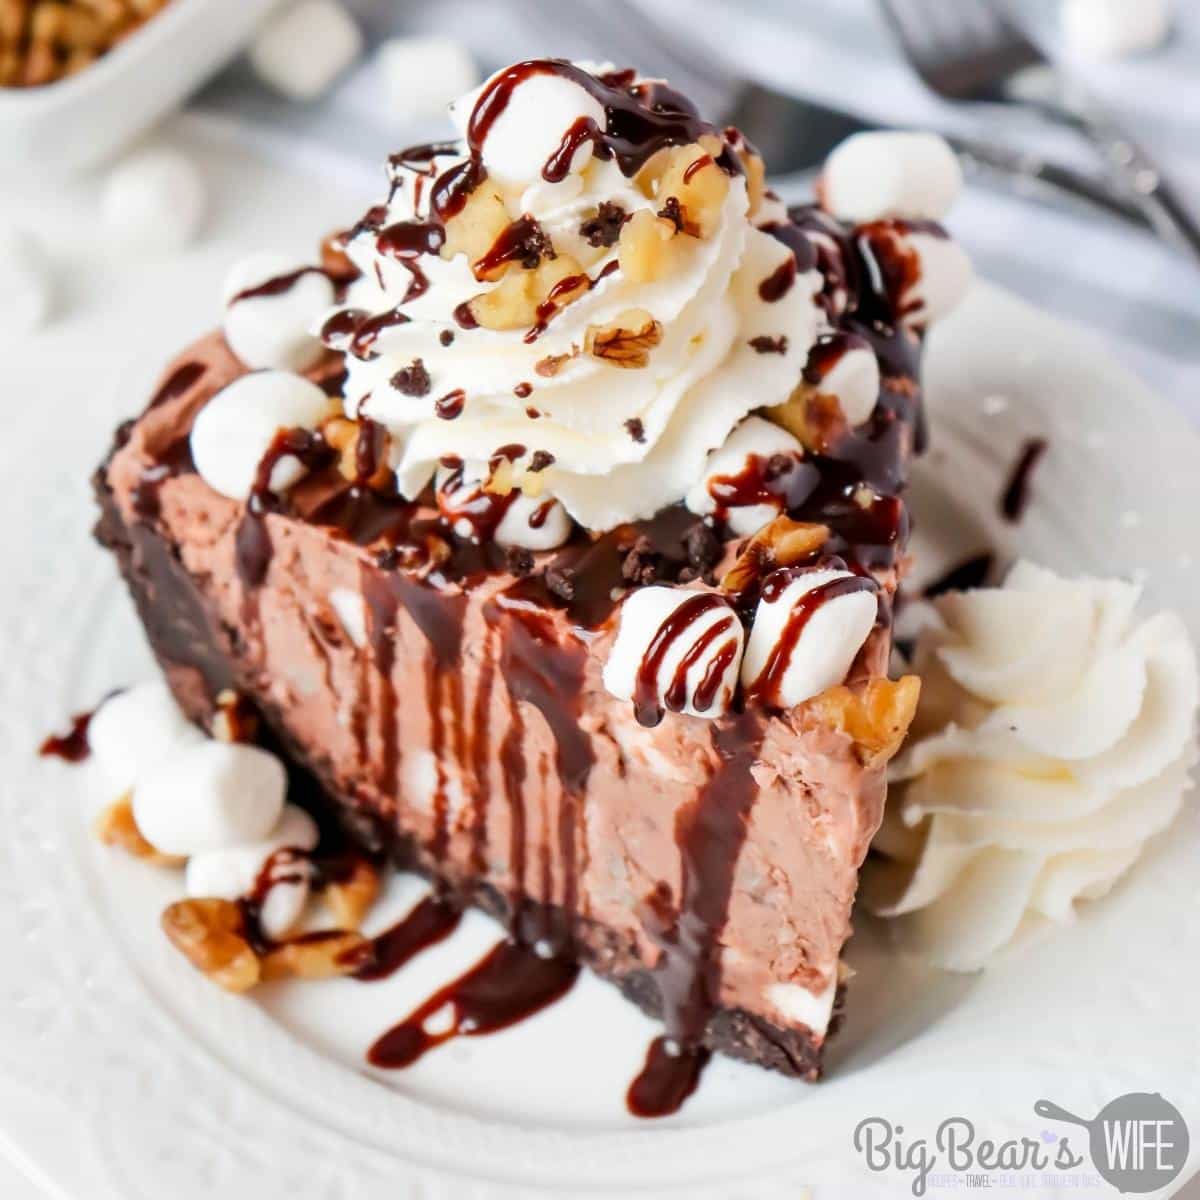 This frozen Rocky Road Pie is full of all of the classic rocky road flavors! With its frosty chocolate base, marshmallows and walnuts, this pie is just like rocky road ice cream in pie form!